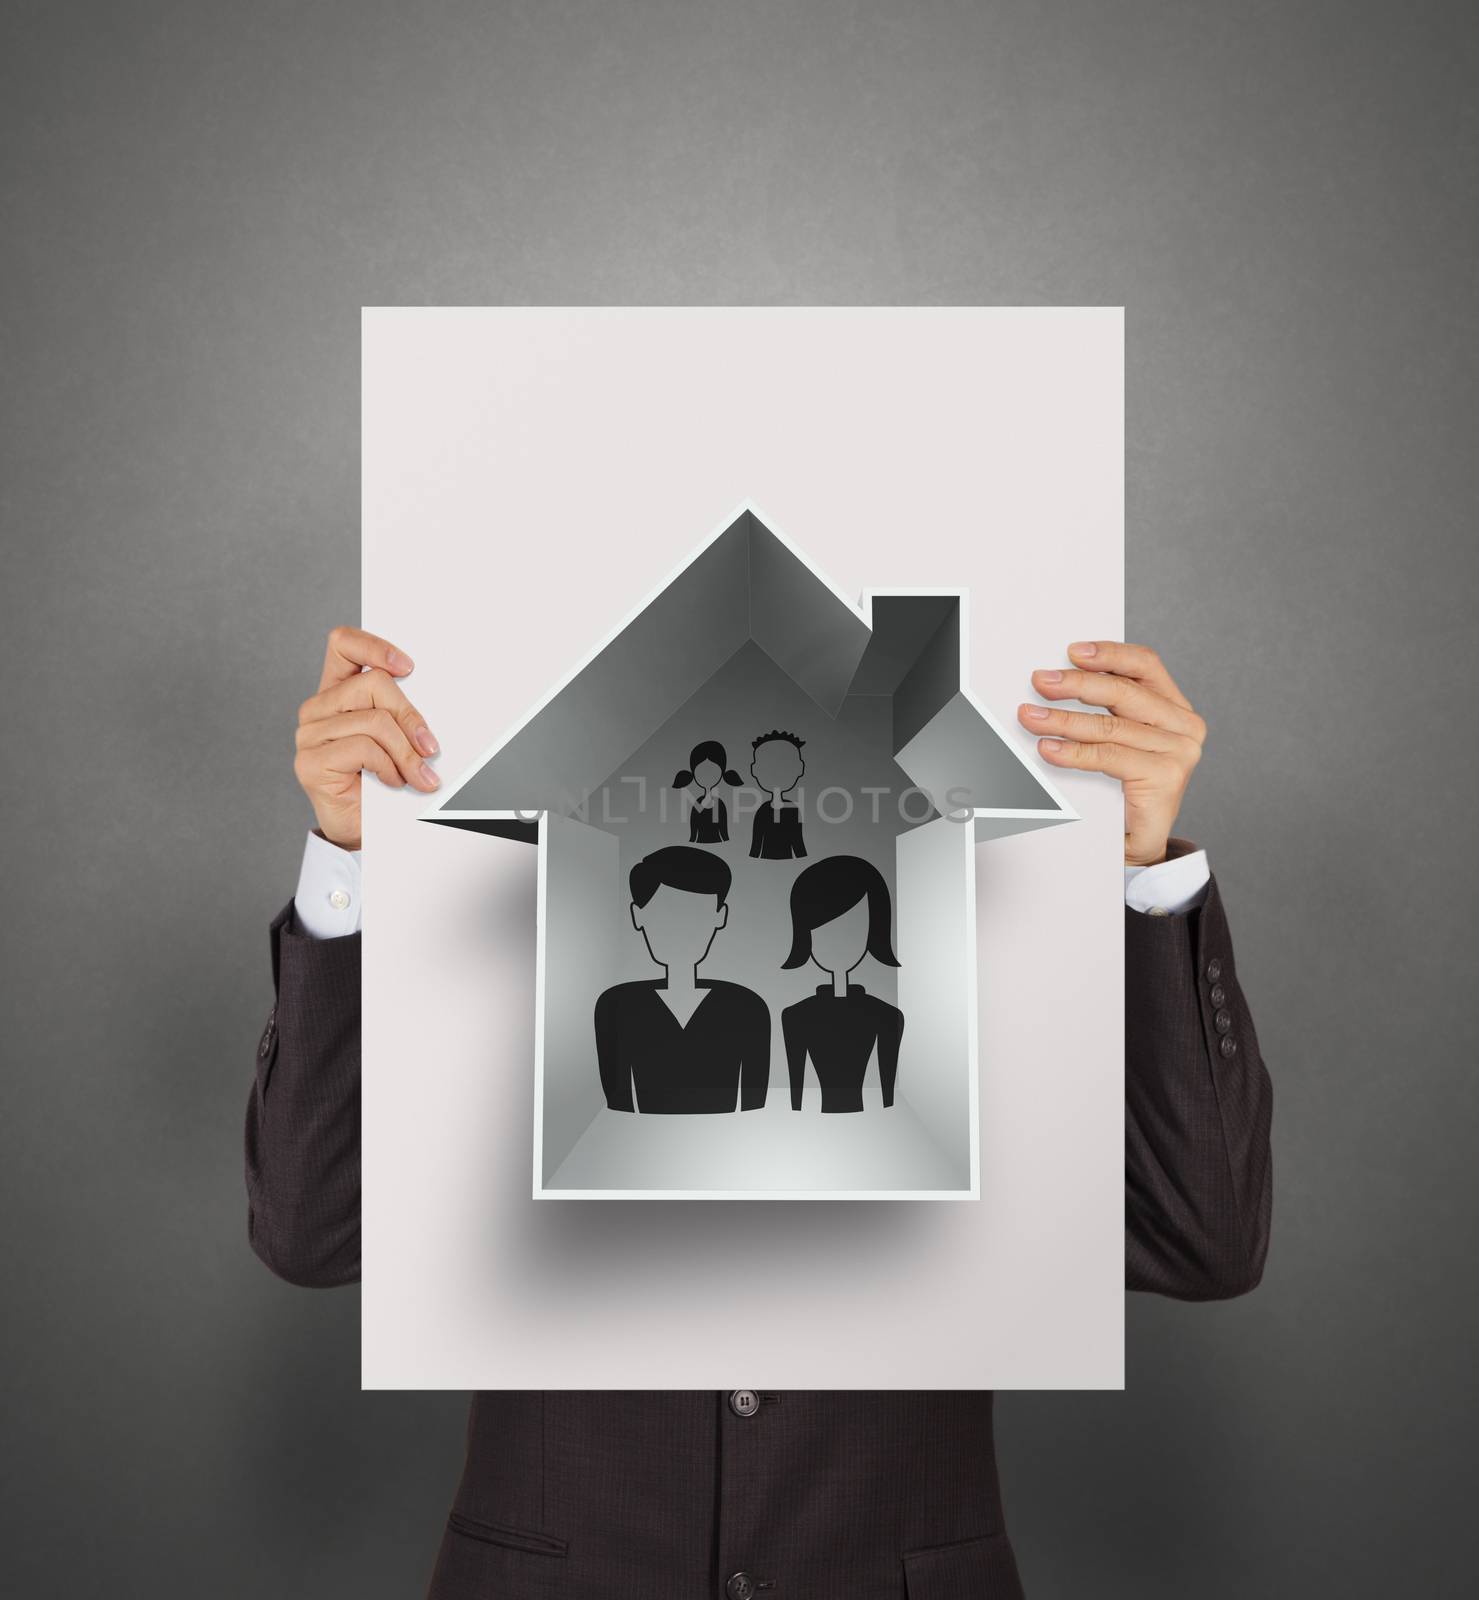 businessman show hand draw family and house on poster as insurance concept